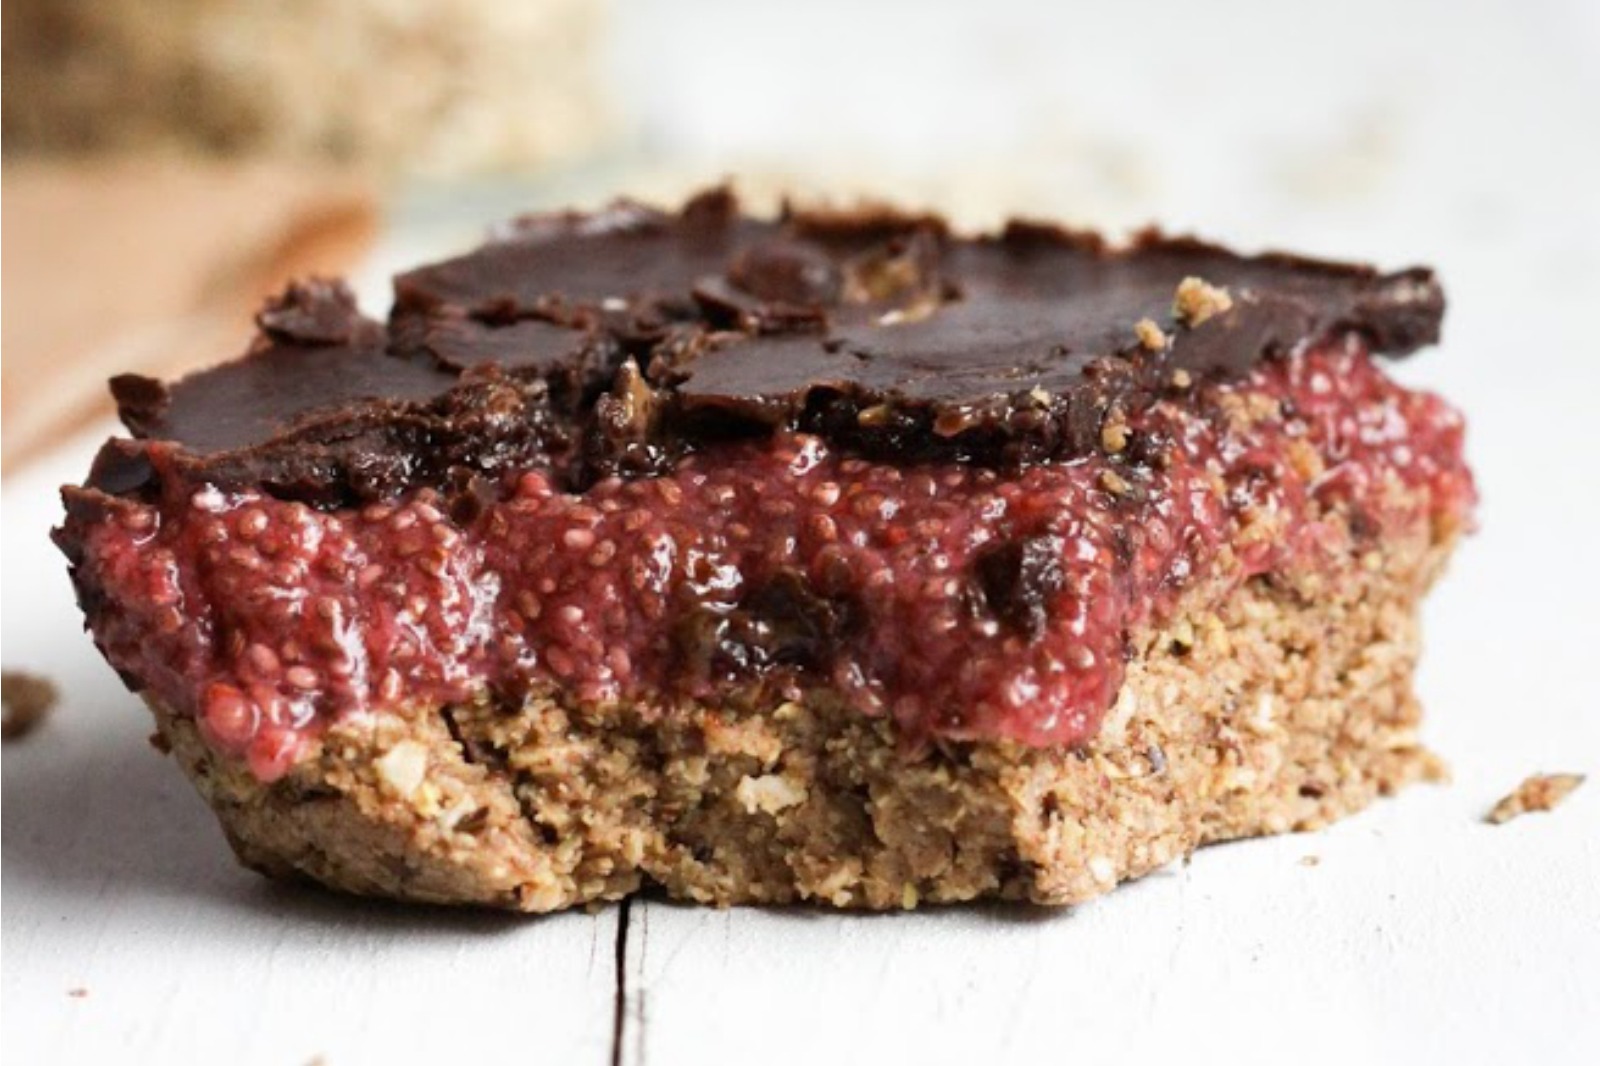 Almond Butter and Chia Jam Bars With Chocolate [Vegan]